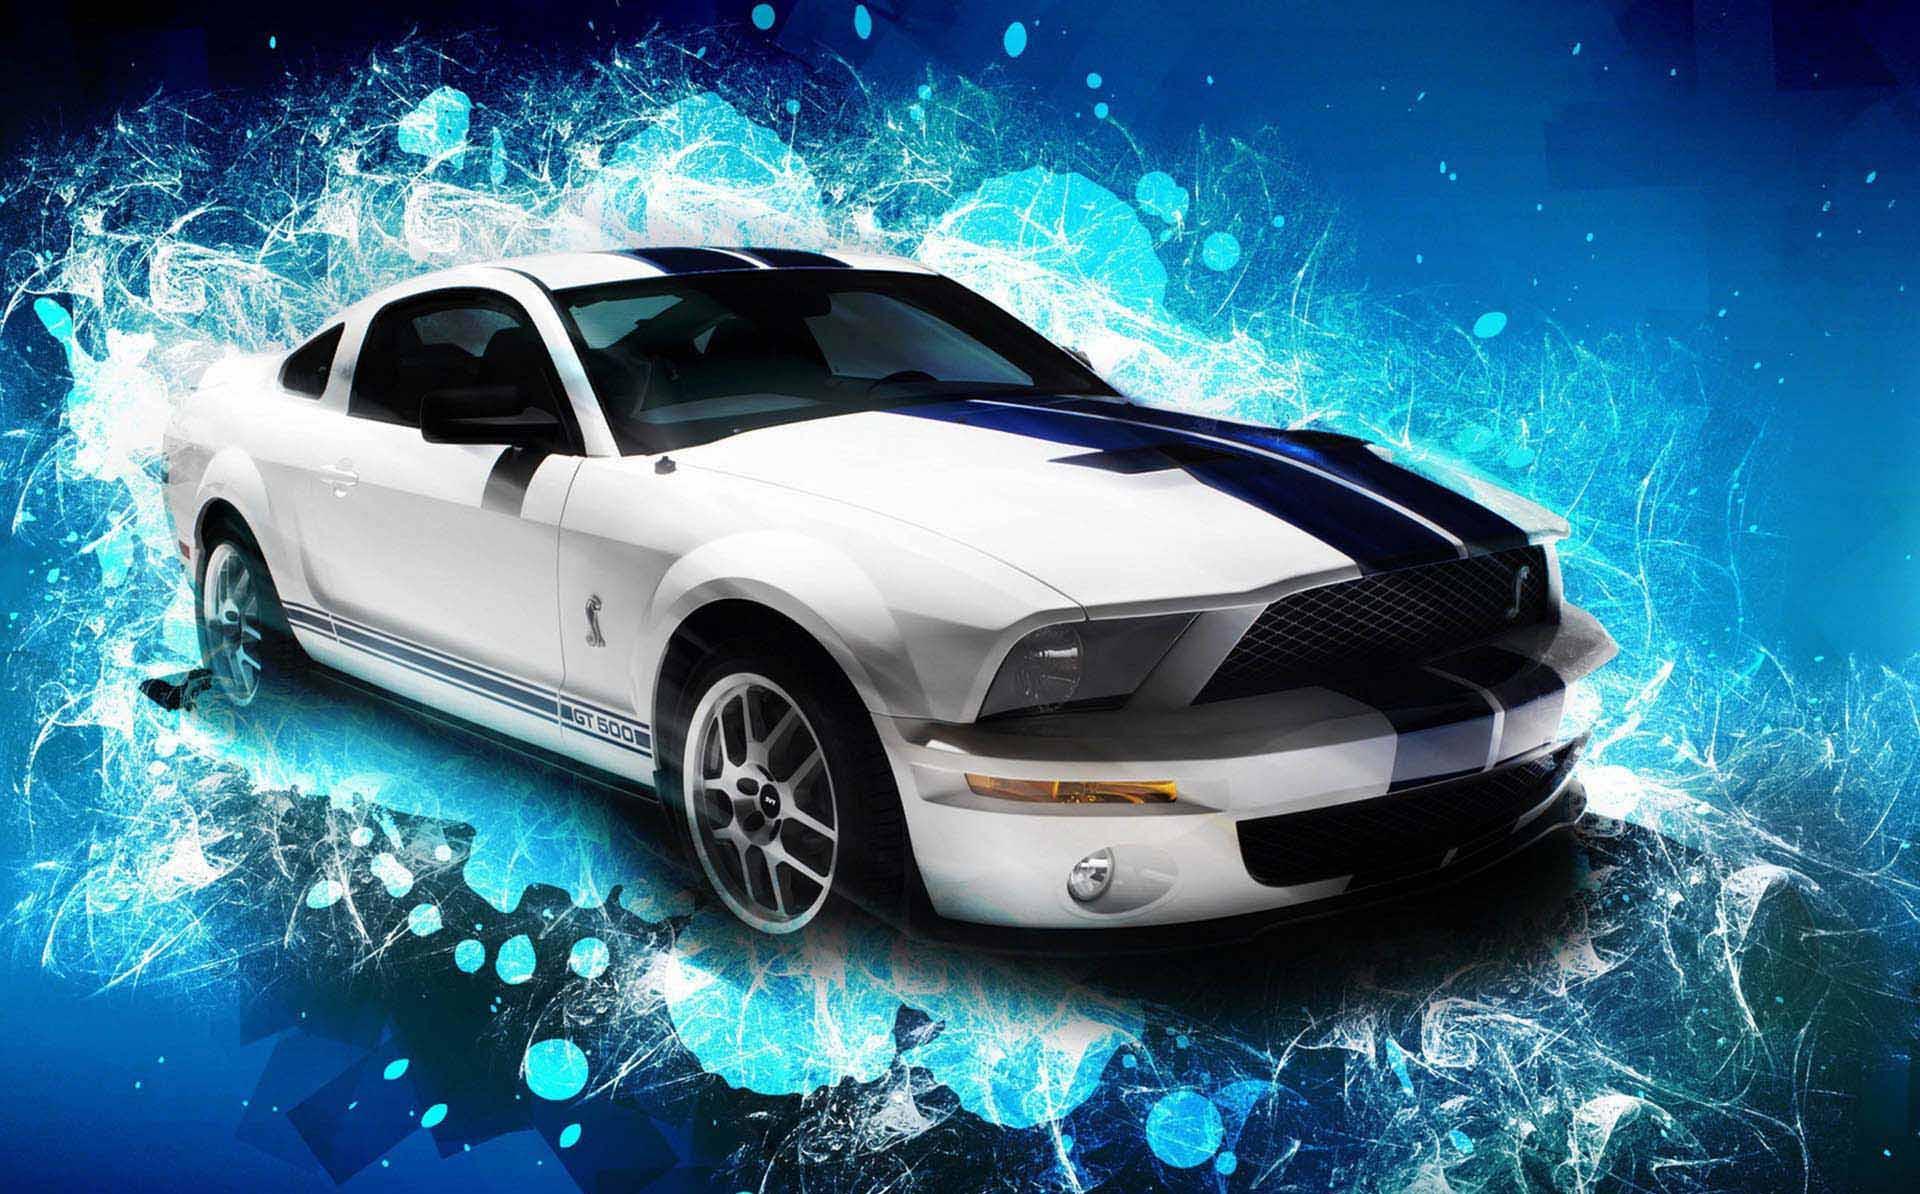 Car Wallpaper 4k Ultra Hd For Android Apk Download